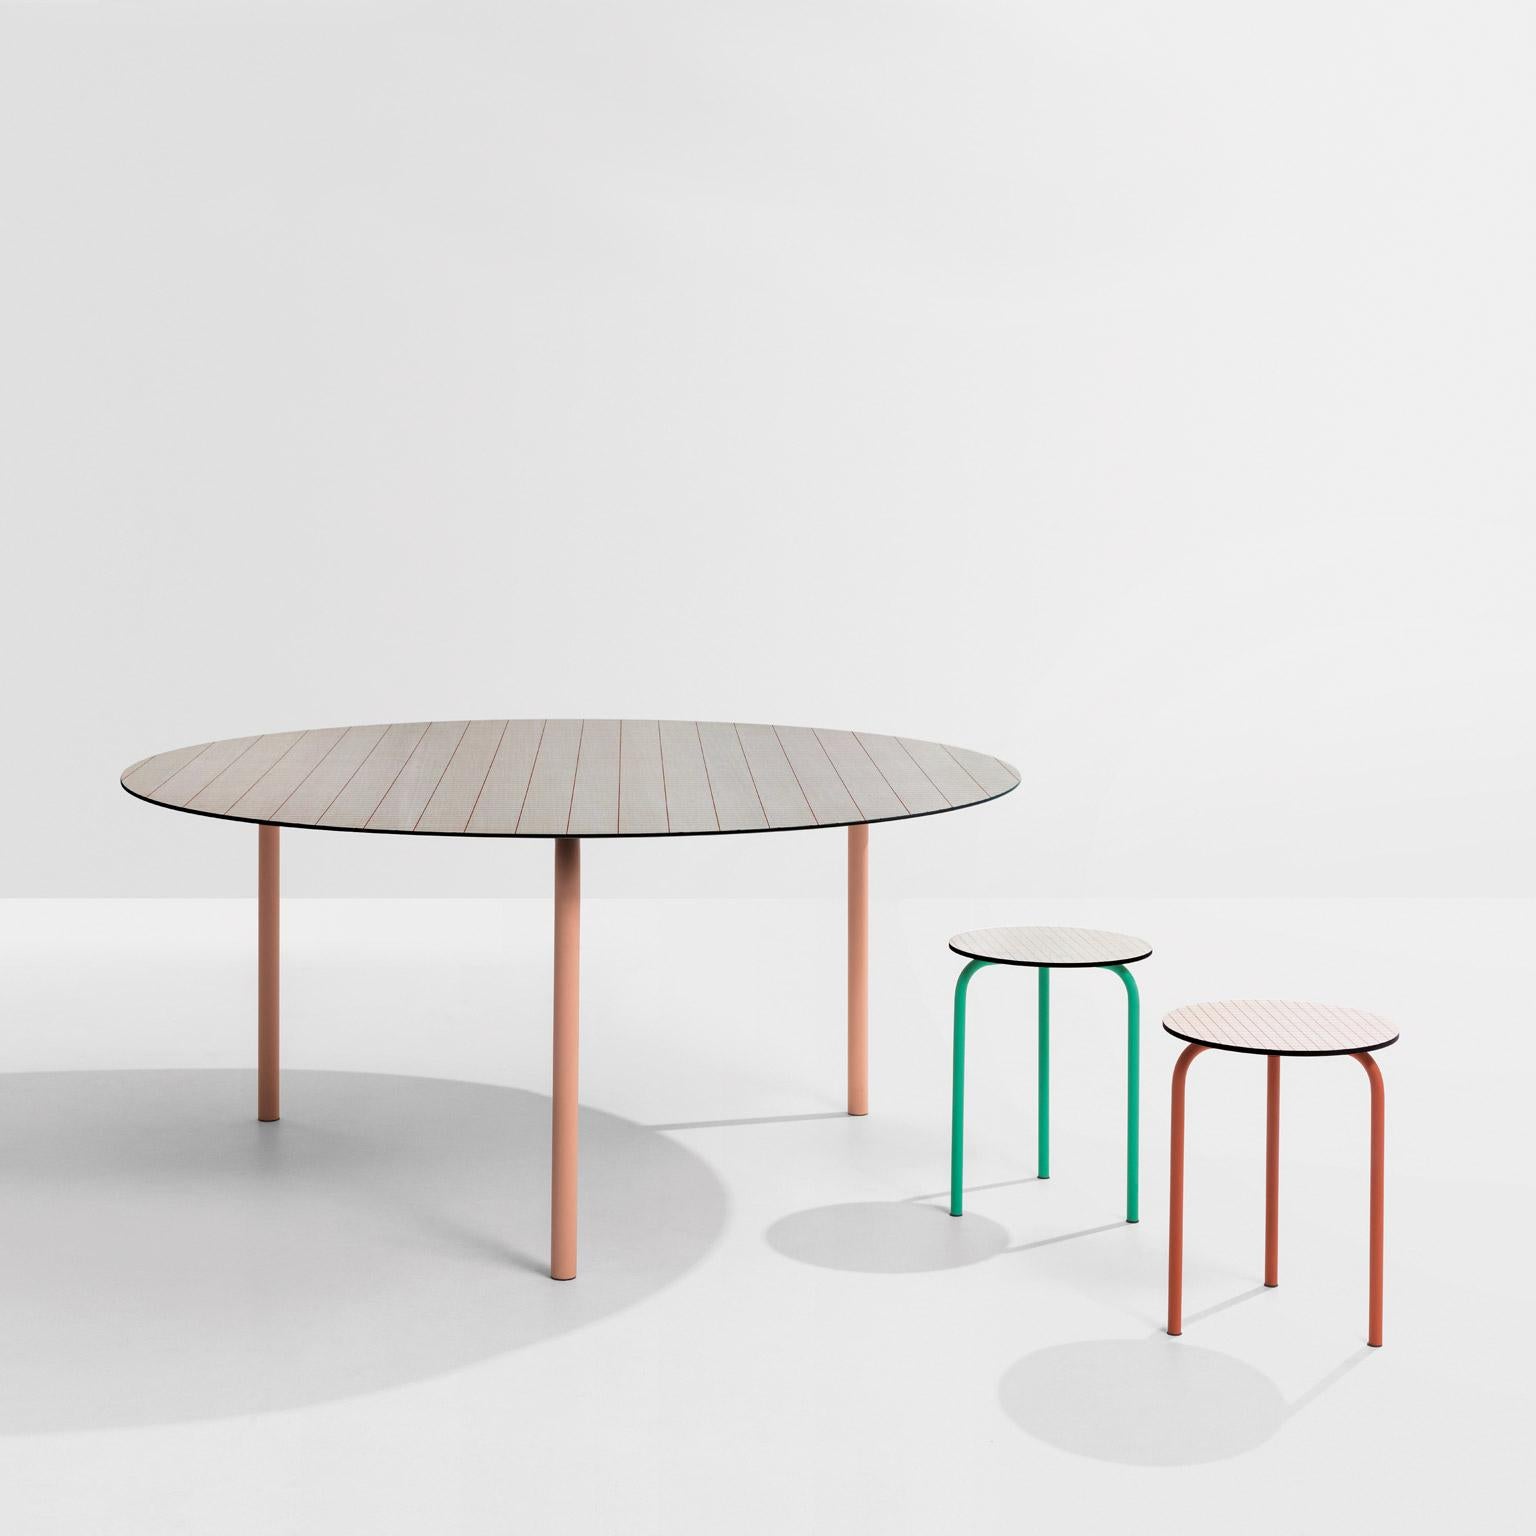 Contemporary Small Table Check Surface Texture Printed, Bauhaus-Inspired (Italienisch) im Angebot